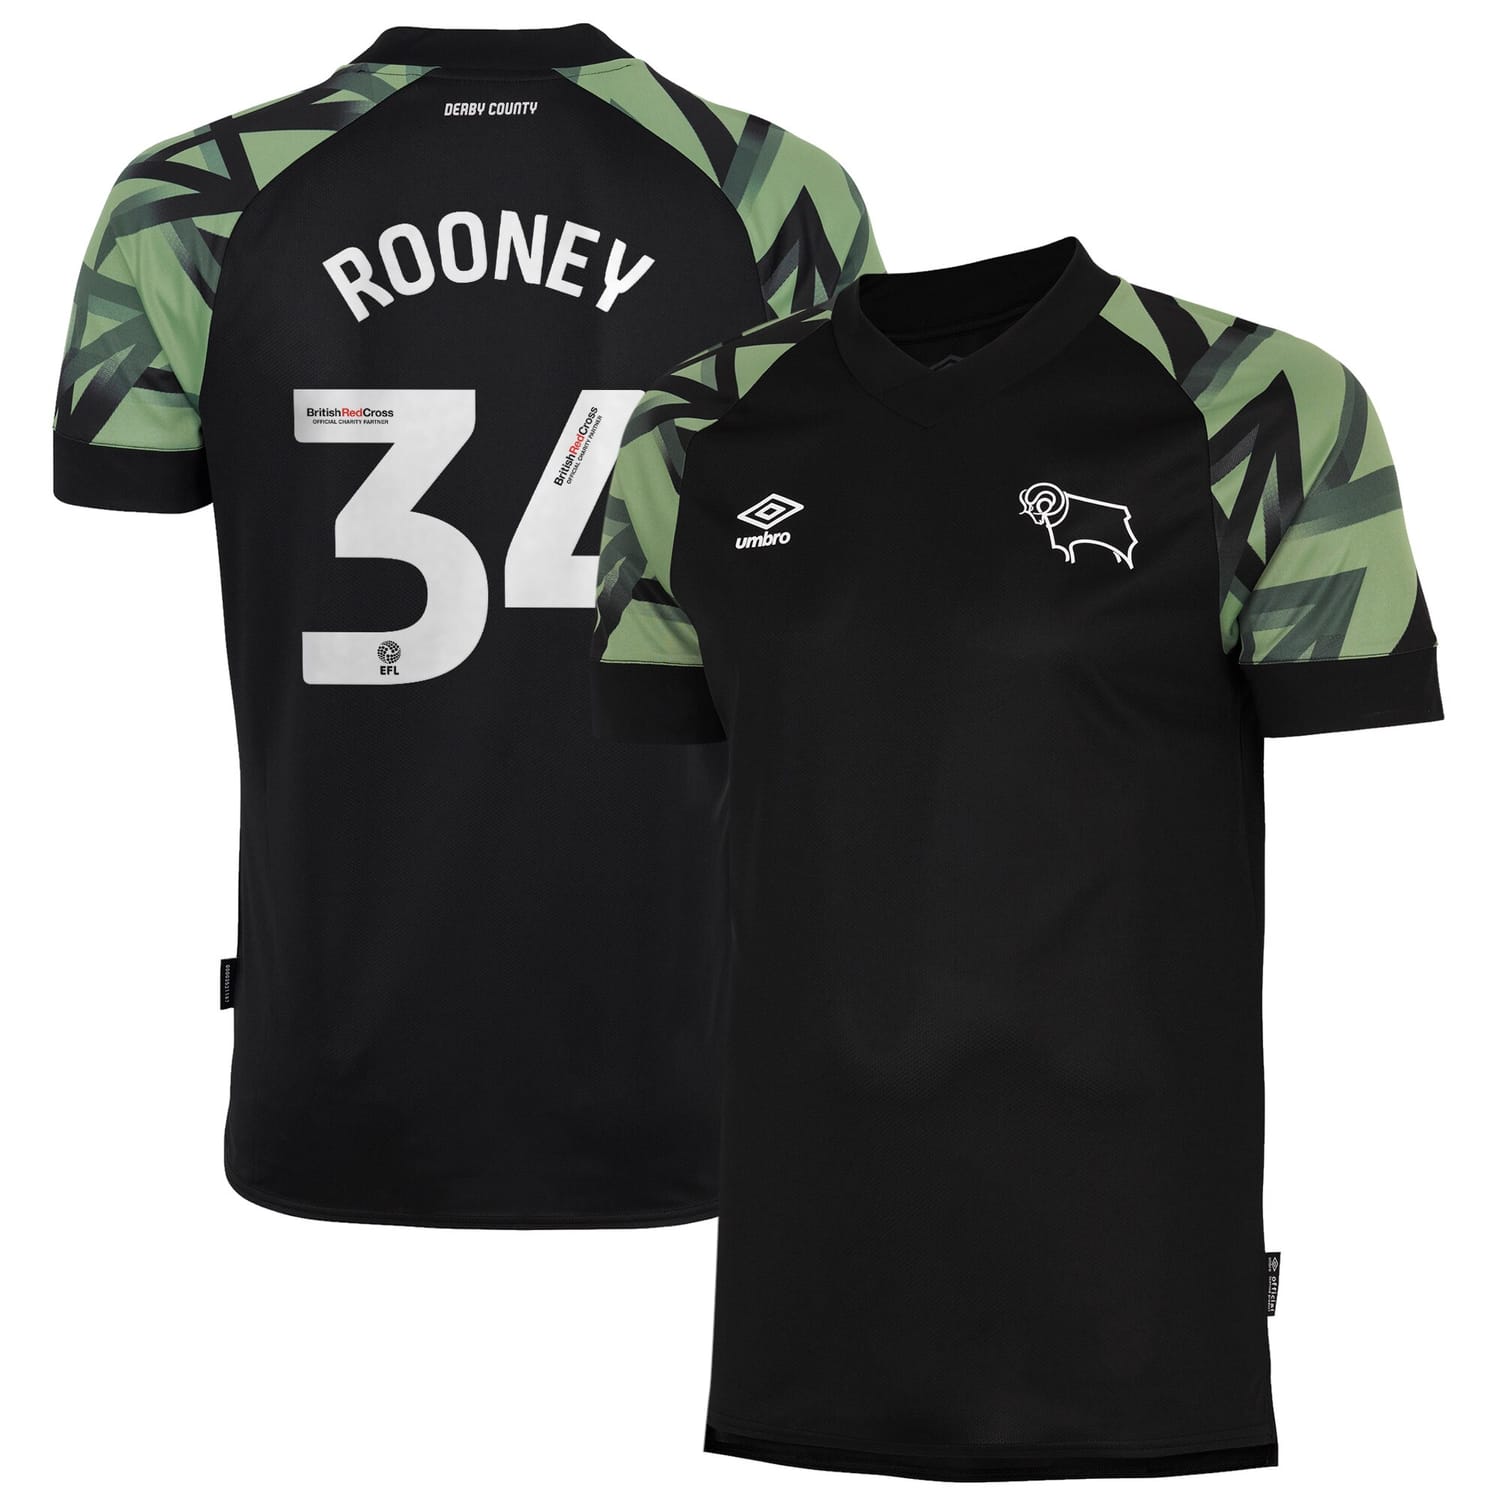 EFL League One Derby County Away Jersey Shirt 2022-23 player Rooney 34 printing for Men